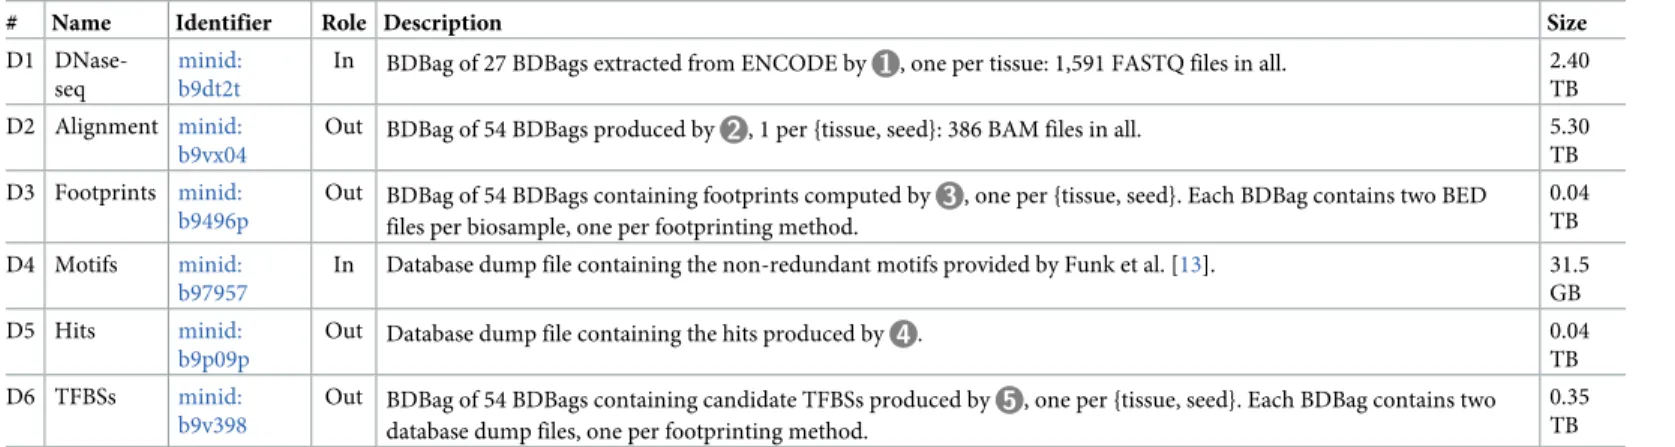 Table 3. The software used to implement the five steps shown in Fig 1. As the software for 1 is used only to pro- pro-duce the input data at minid:b9dt2t, we do not provide identifiers for specific versions of that software.